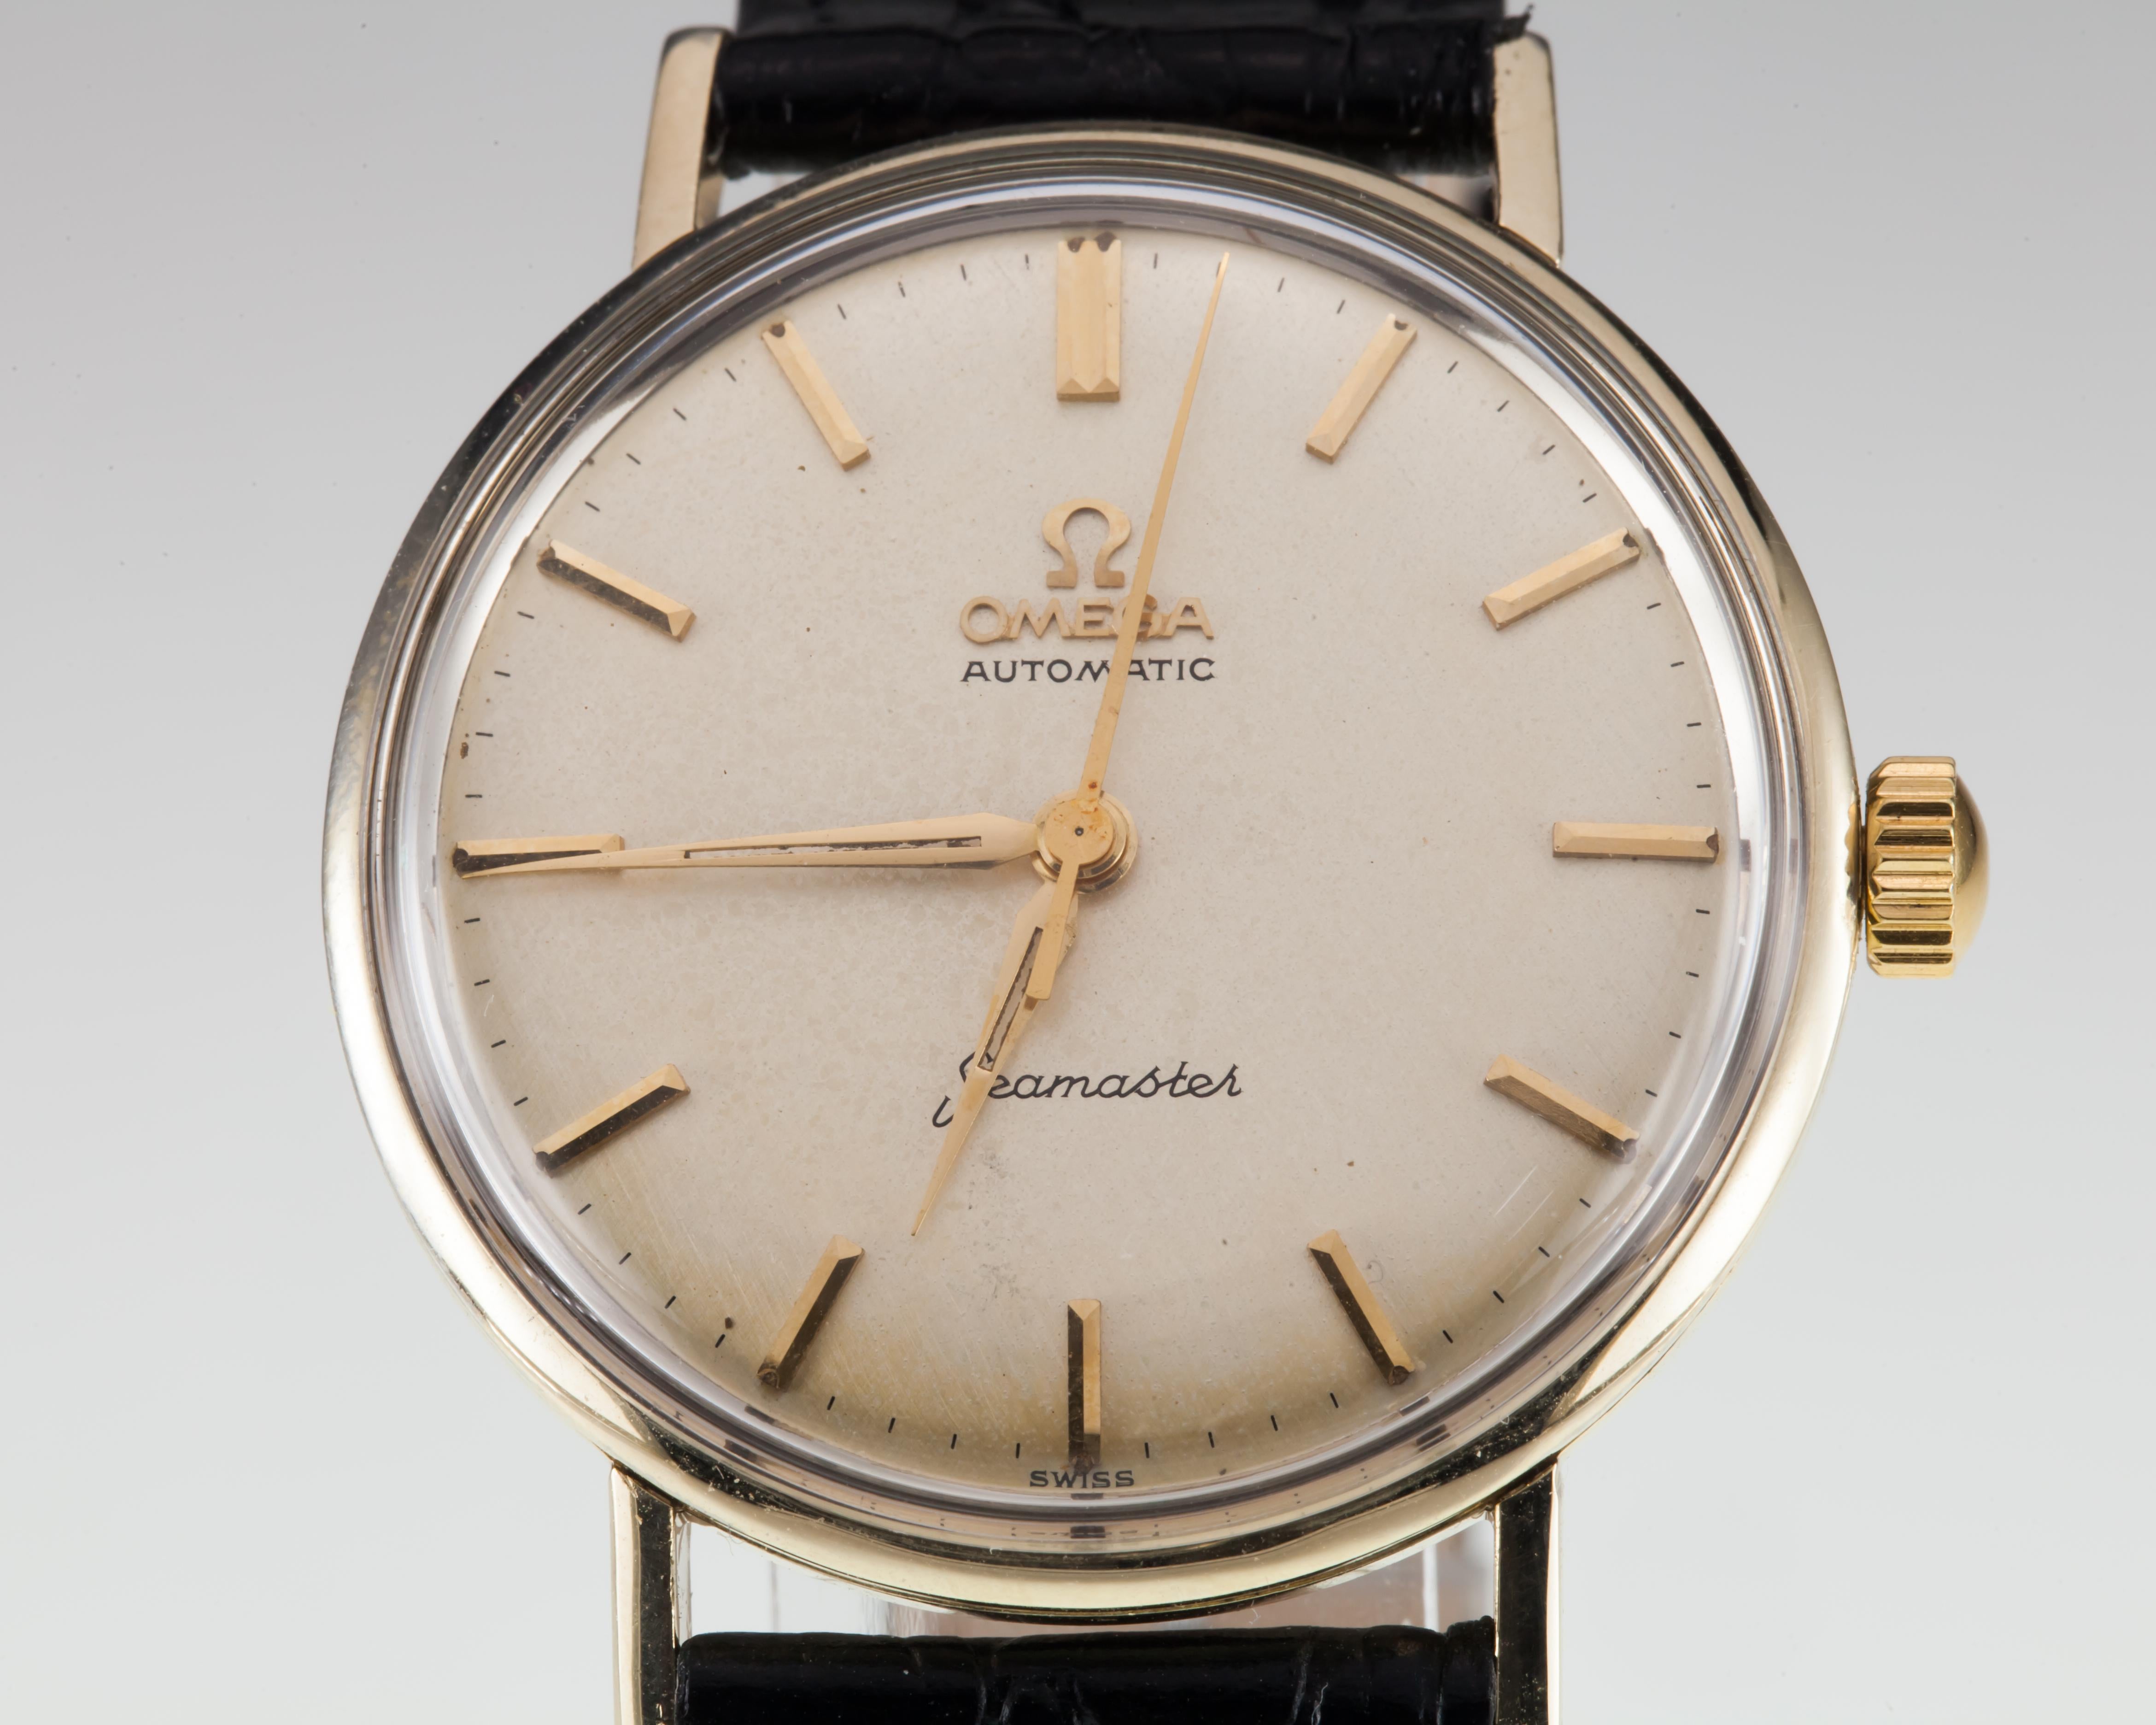 Omega 18k Gold Filled Automatic Seamaster Men's Watch with Leather Band 550

Movement #550
Movement Serial #181799XX
Year: 1961
Case #1245186.LL6287-1

18k Gold Filled Round Case
34 mm in Diameter (36 mm w/ Crown)
Lug-to-Lug Distance = 41